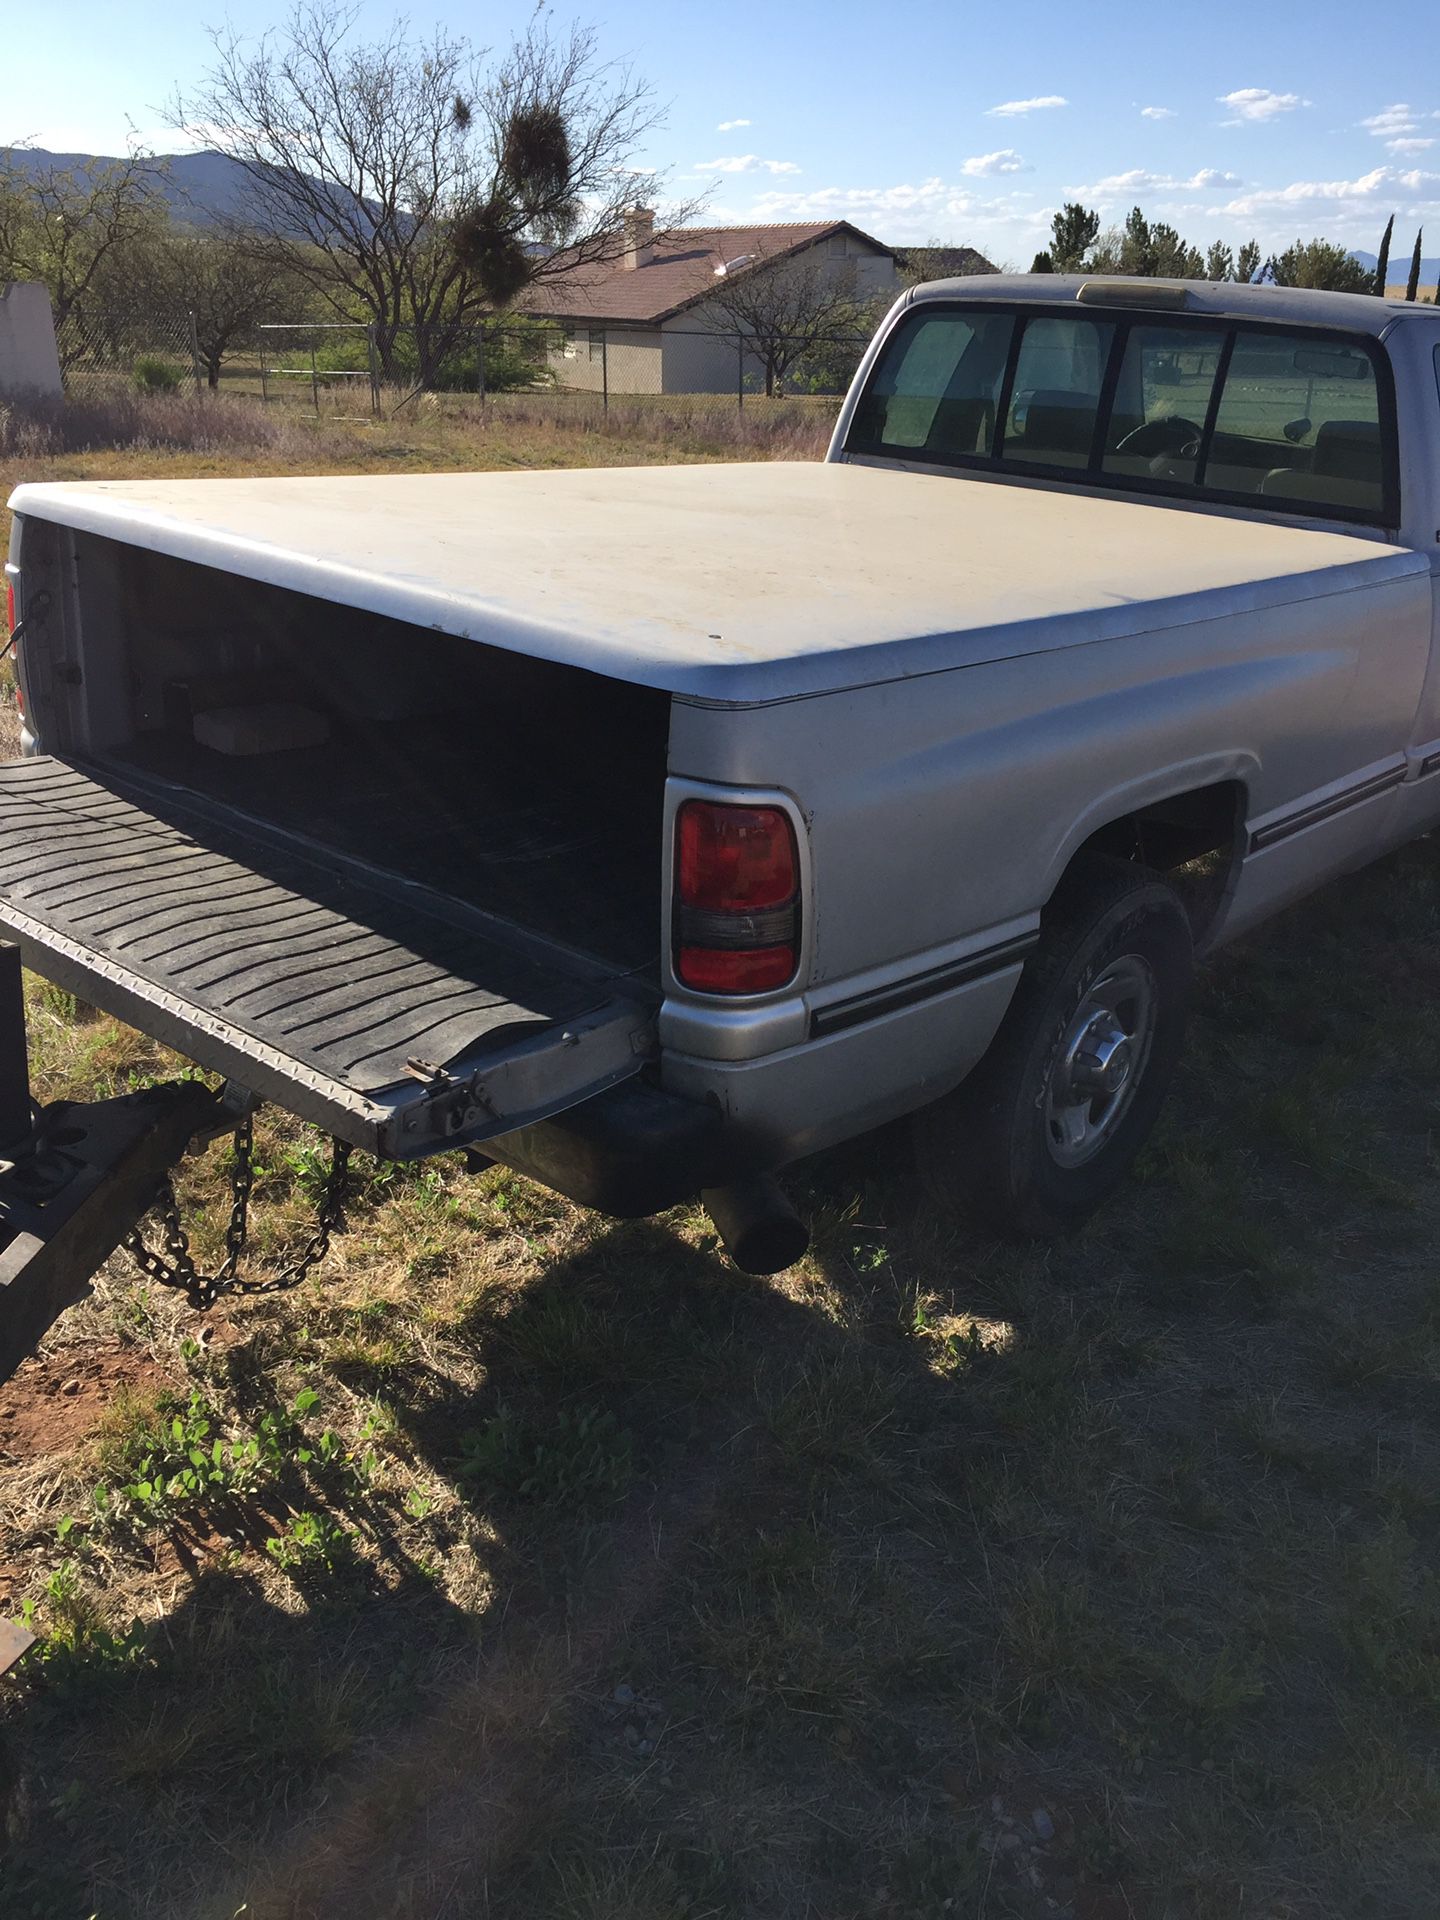 Off Of A 1996 Dodge Ram 2500 Long Bed  Truck. 